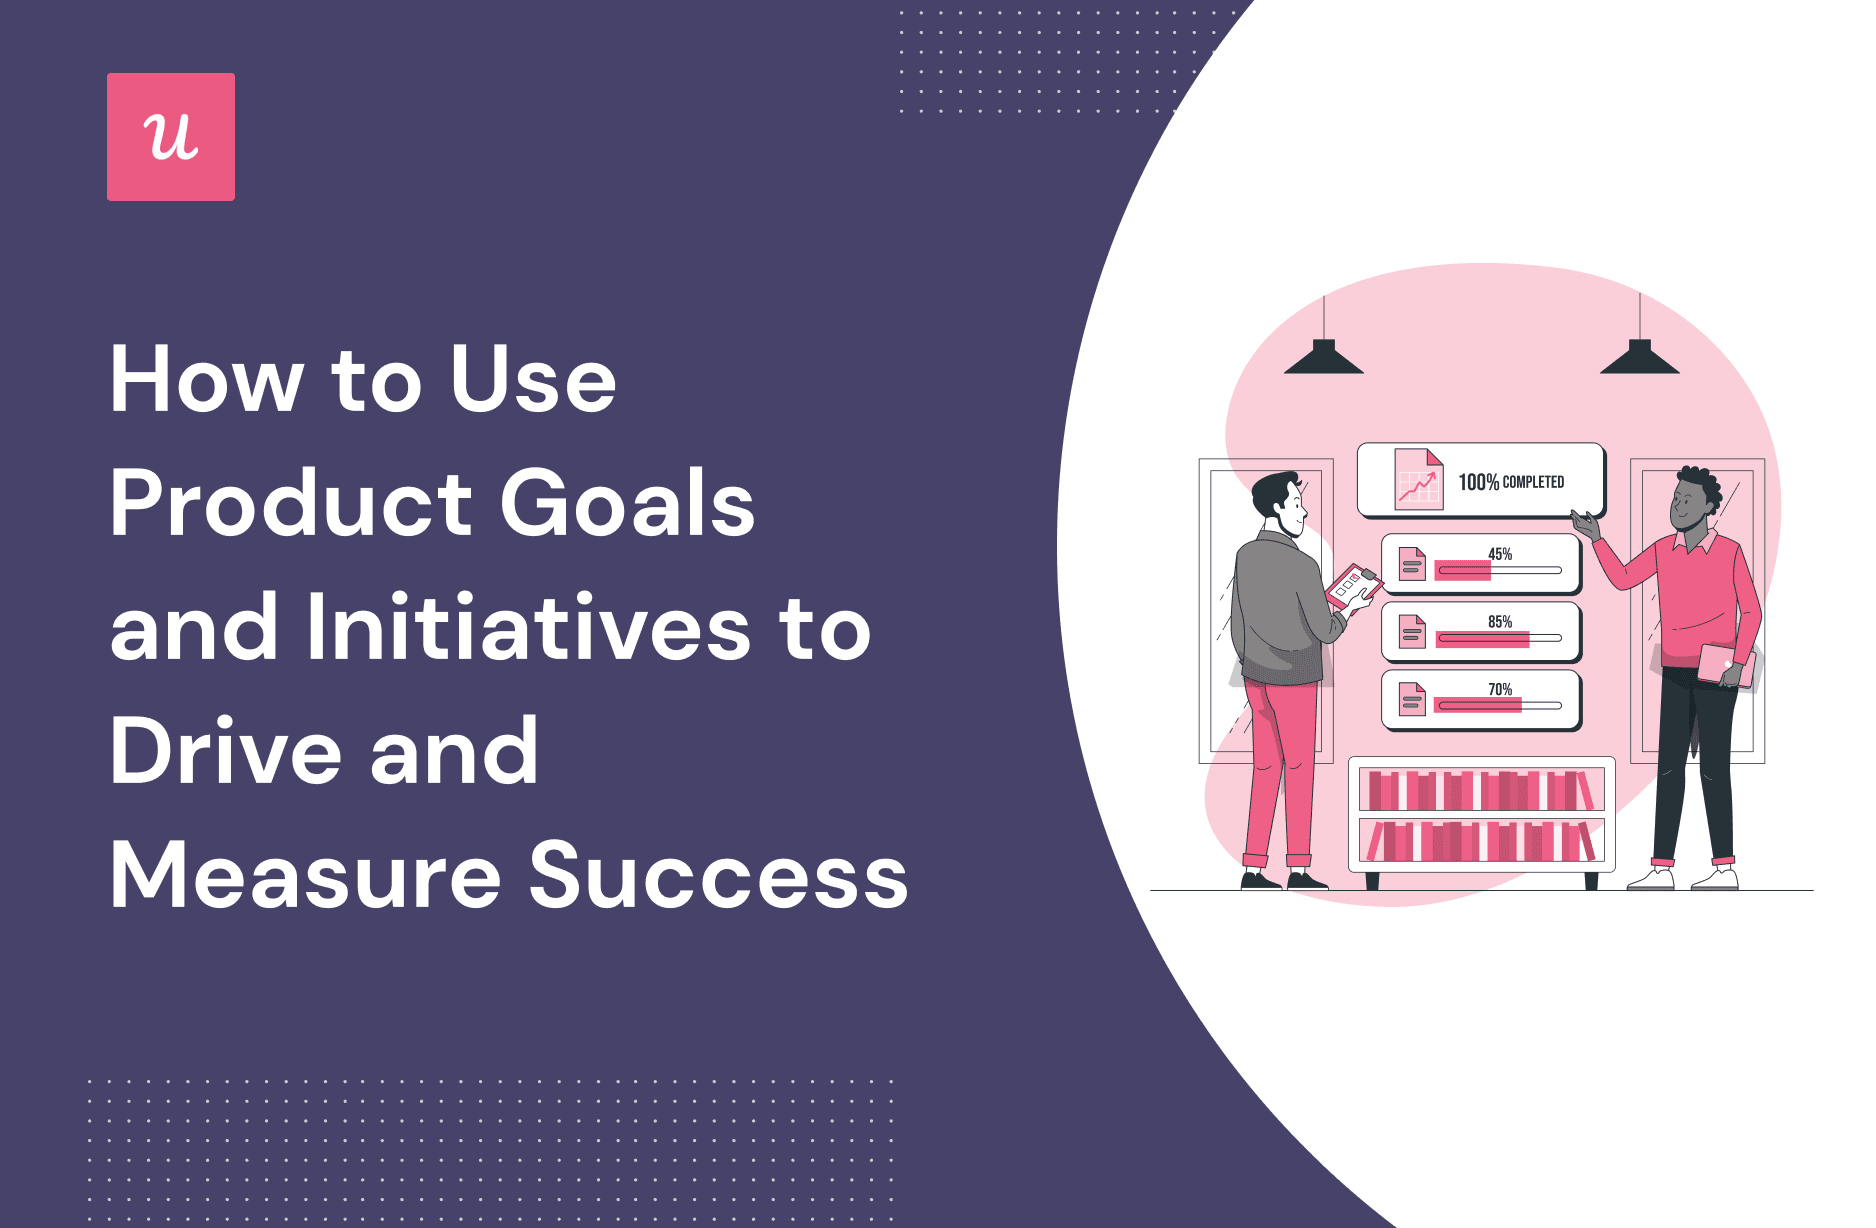 How to Use Product Goals and Initiatives to Drive and Measure Success cover